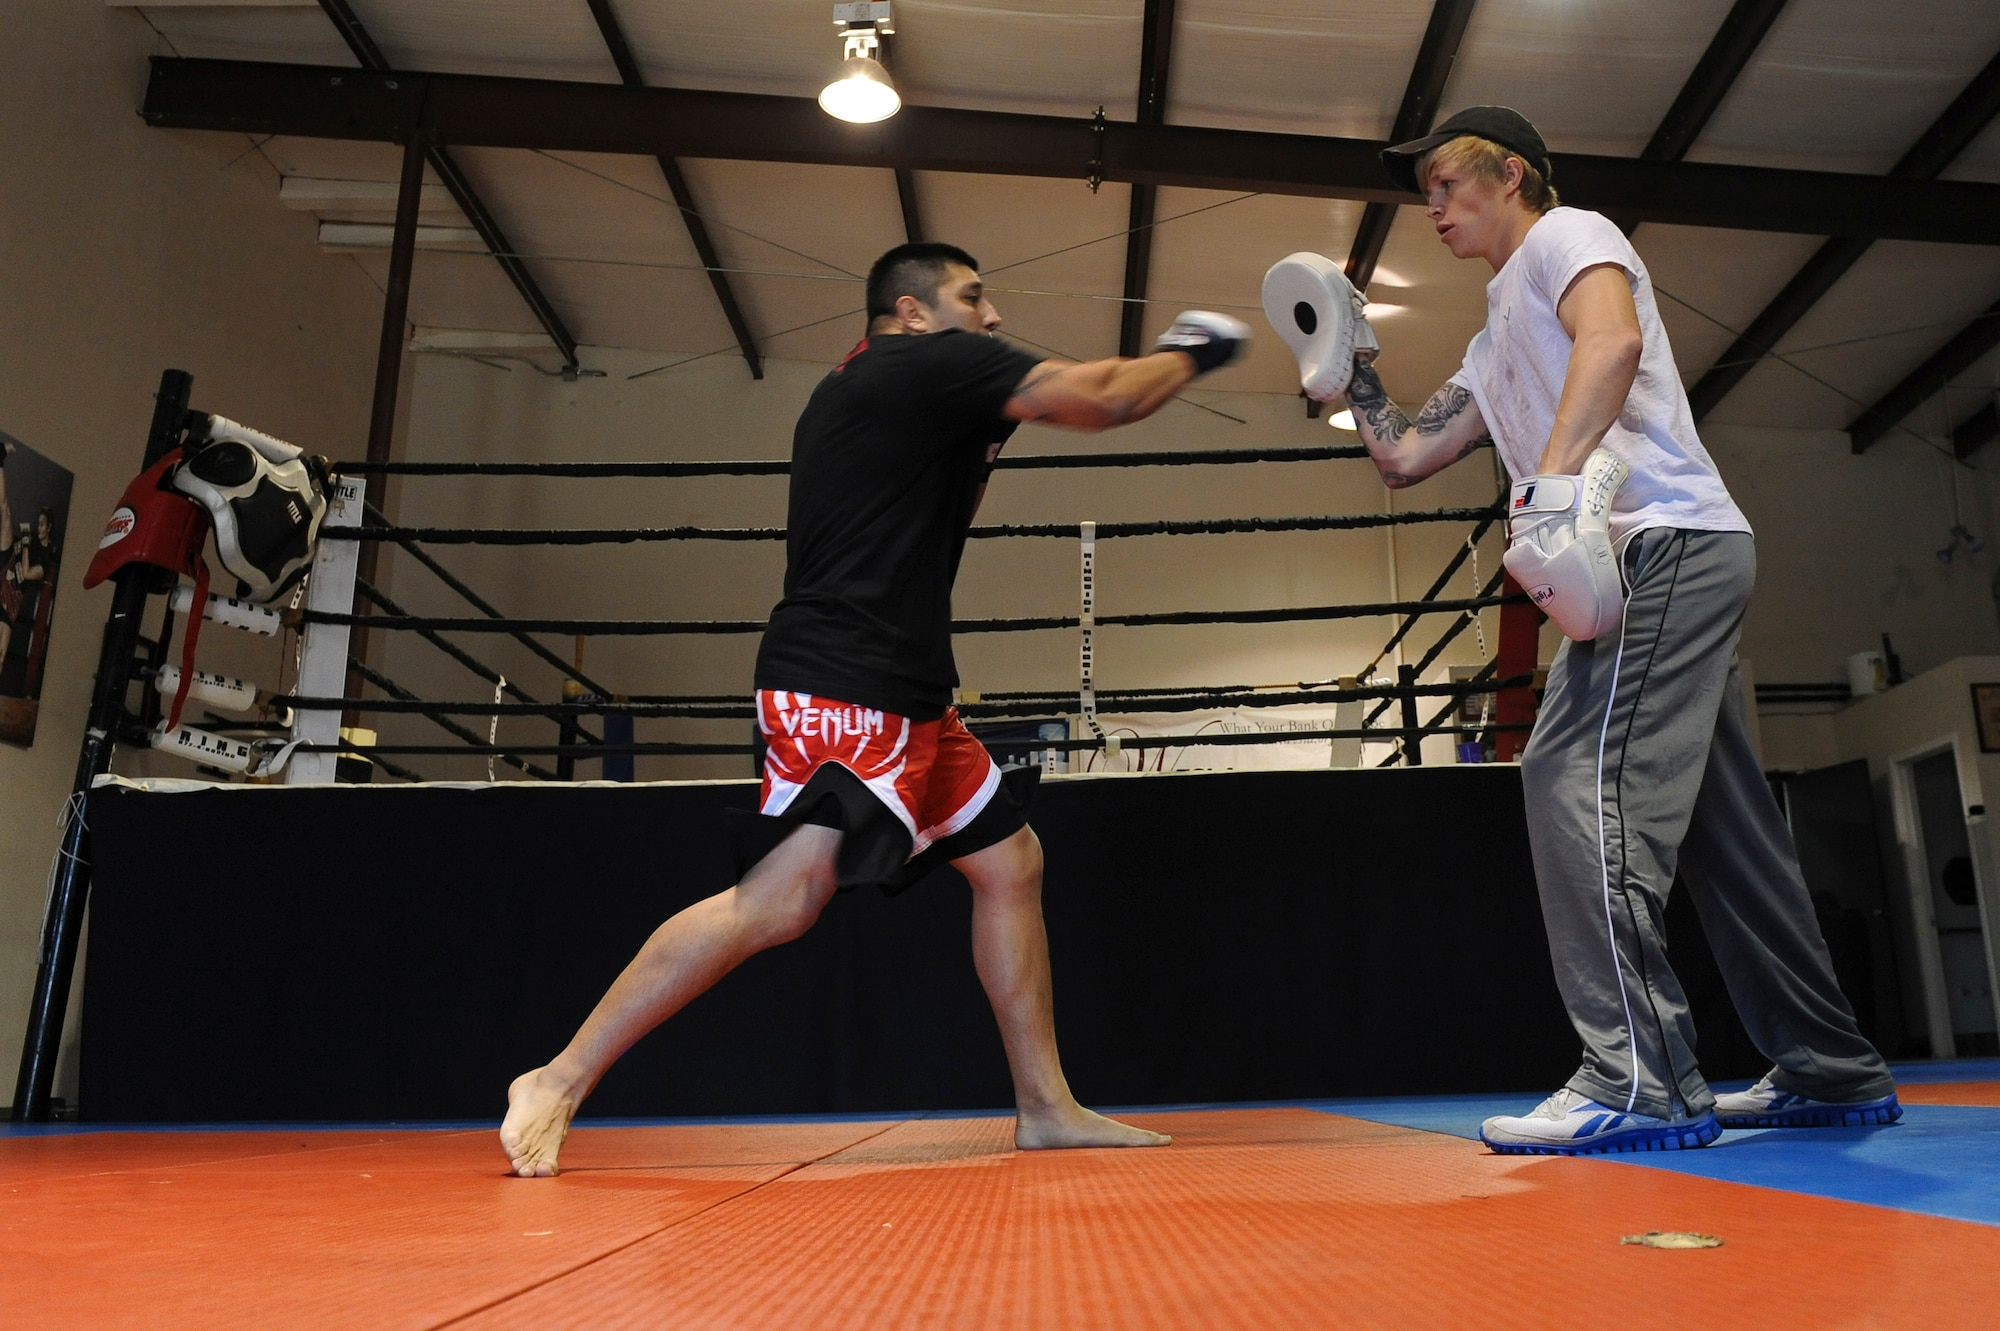 Staff Sgt. Jeremy Caudillo, 2nd Force Support Squadron fitness center supervisor, spars with Russell Biggs, mixed martial arts general manager and trainer, at a local MMA gym in Bossier City, La., Dec. 12. Caudillo is currently training for his first professional MMA fight in March. He began his fighting career as a wrestler in high school and college. Caudillo often uses exercises he learned from MMA training to help Airmen stay fit to fight. (U.S. Air Force photo/Senior Airman Micaiah Anthony)